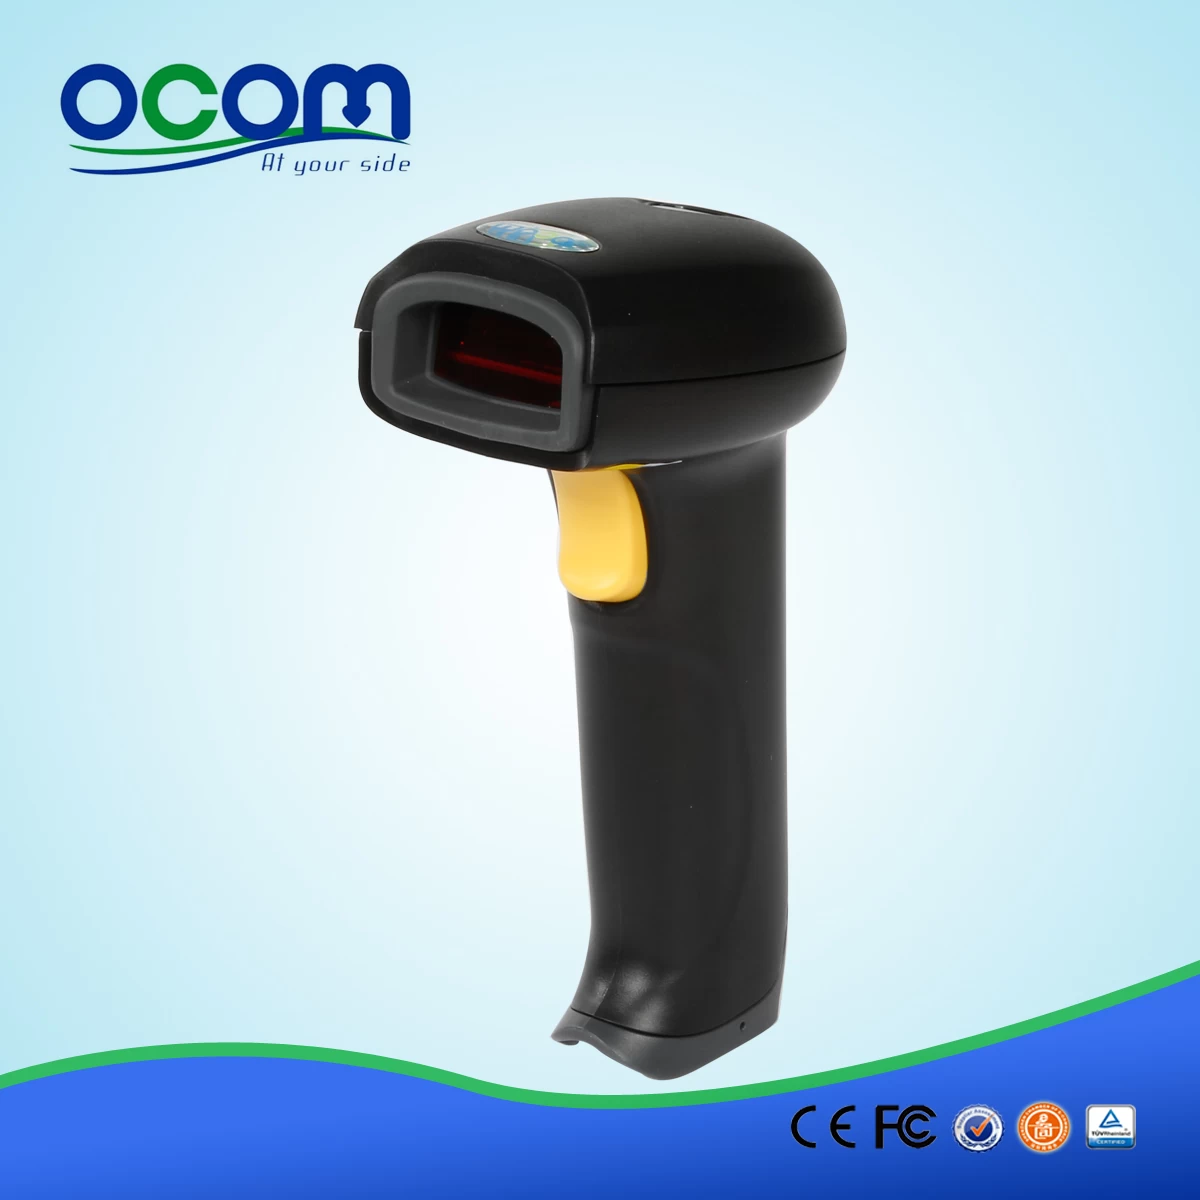 Rugged Auto Sense Laser Barcode Scanner With Stand